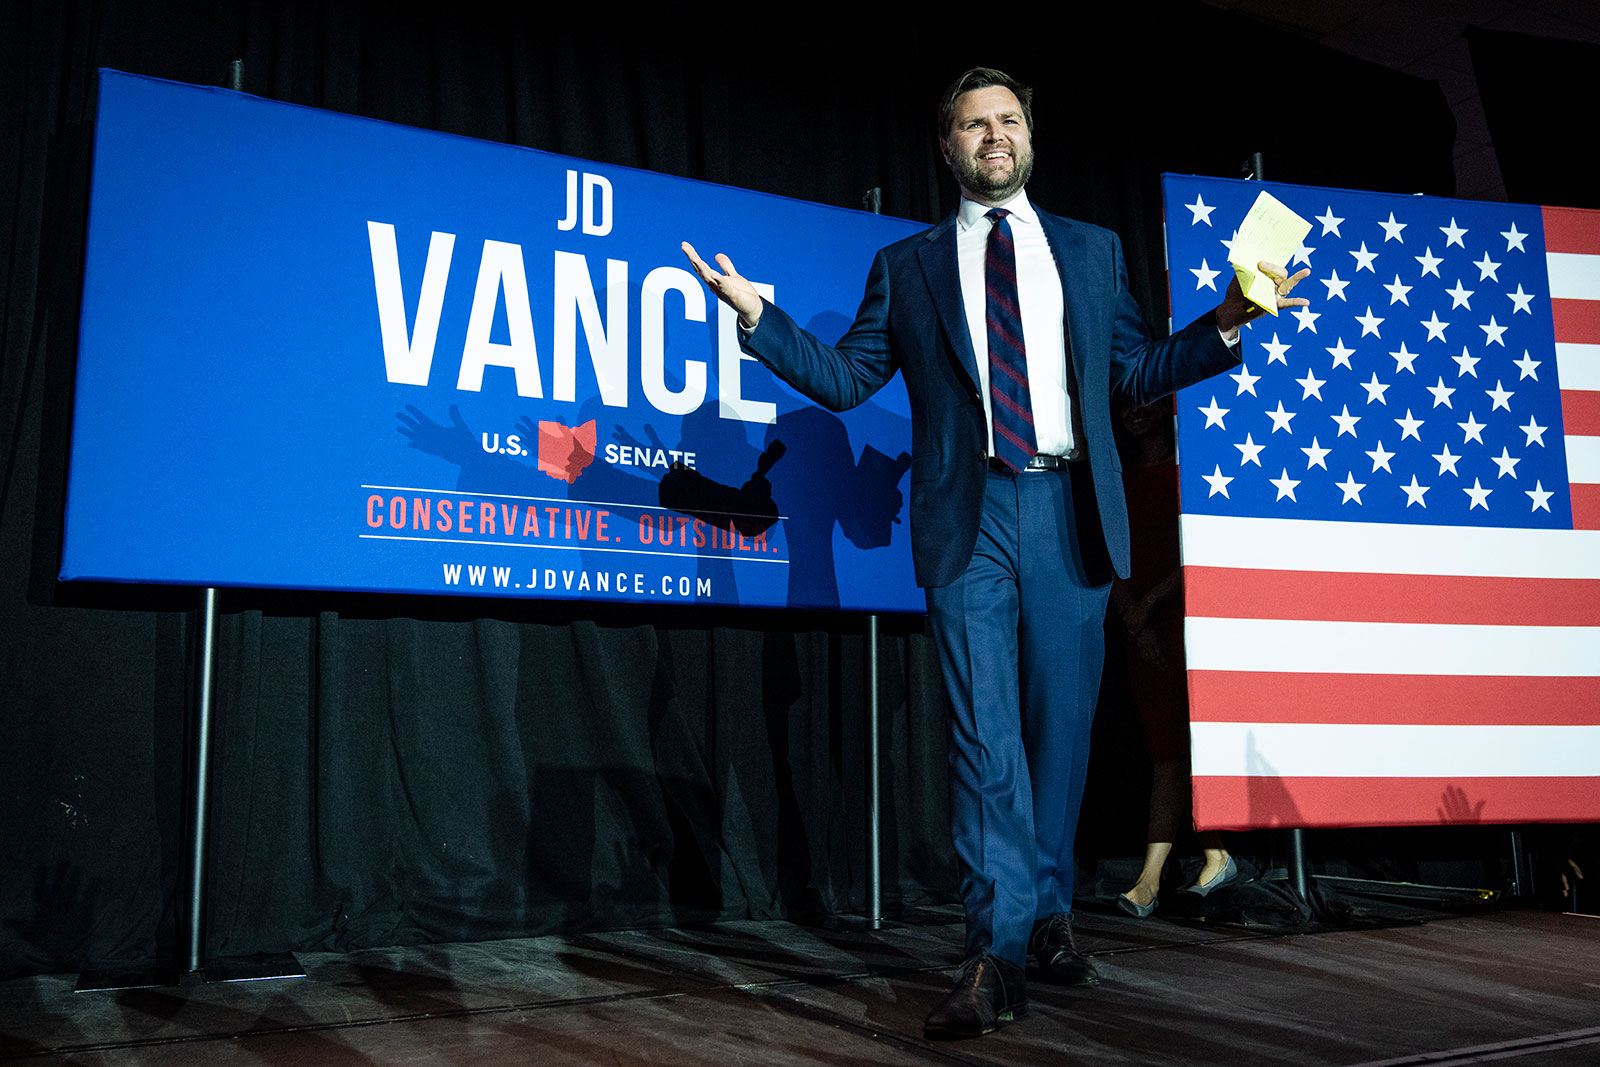 Republican Senate candidate J.D. Vance arrives onstage after winning the primary at an election night event in Cincinnati, Ohio, on May 3.